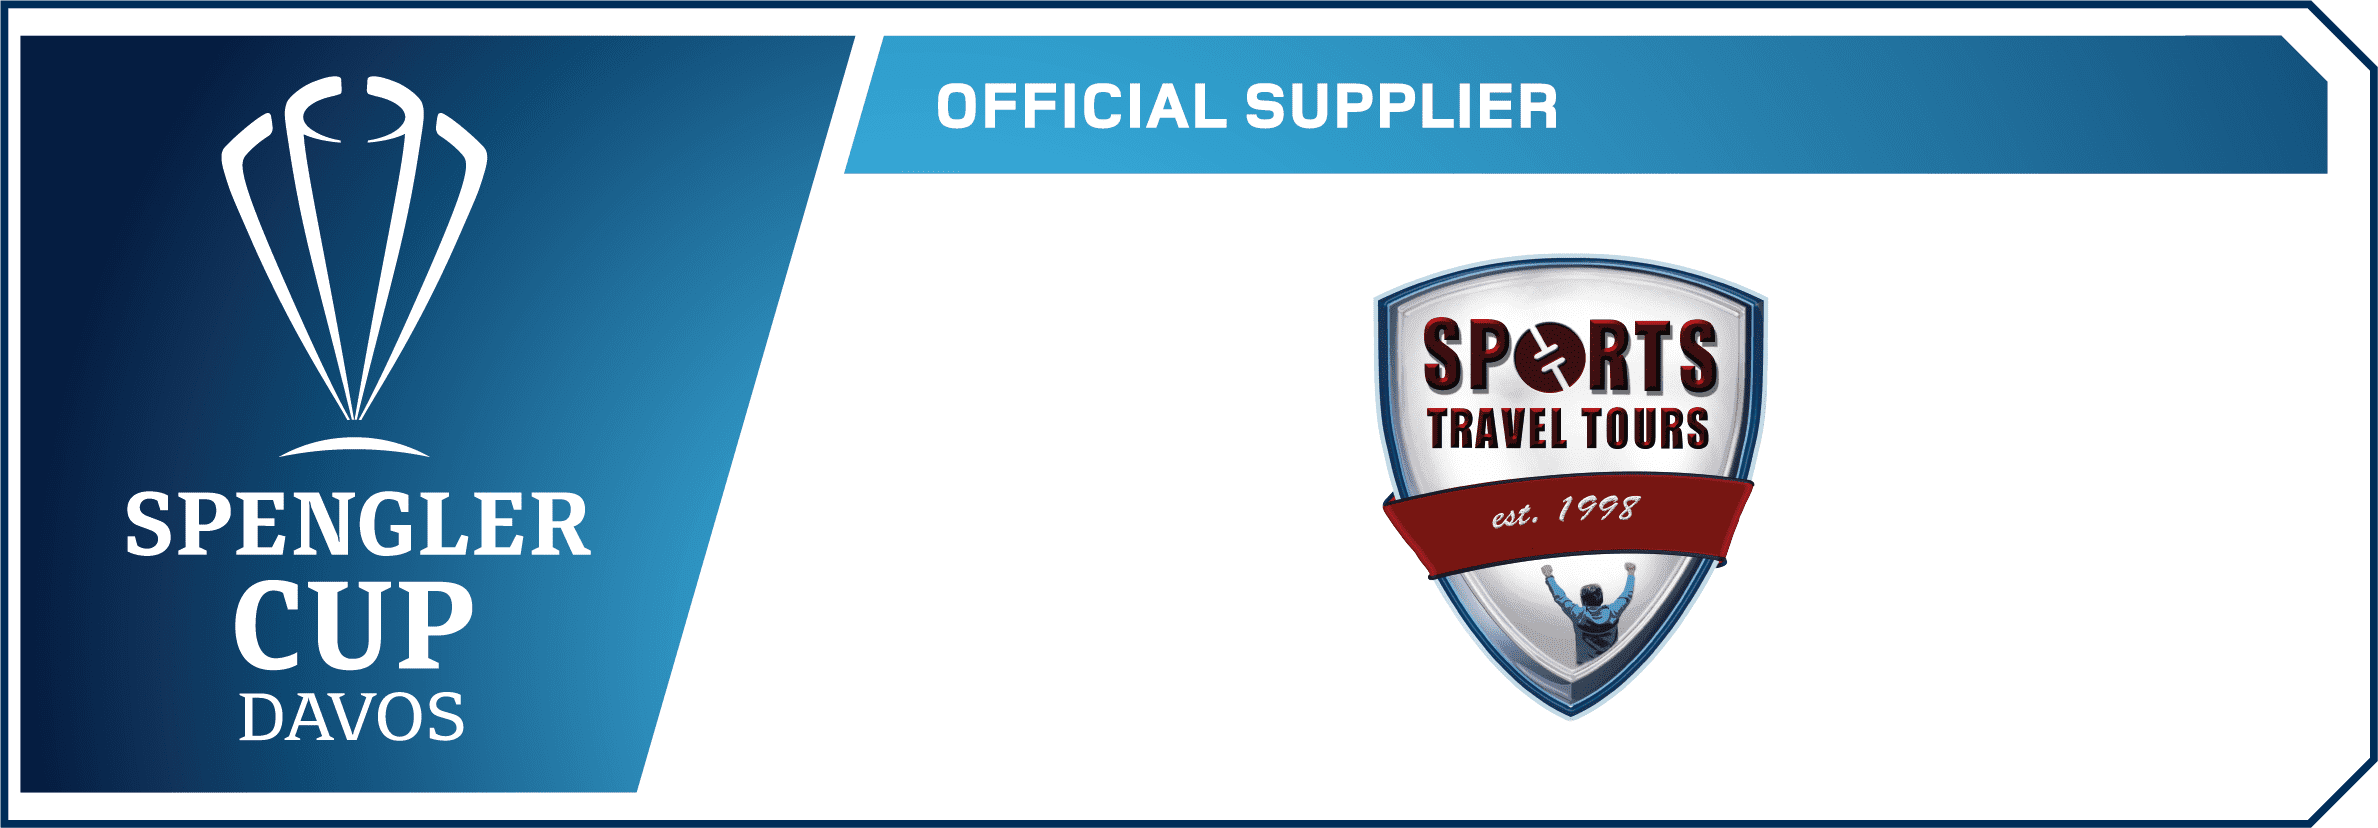 Sports Travel Tours Banner